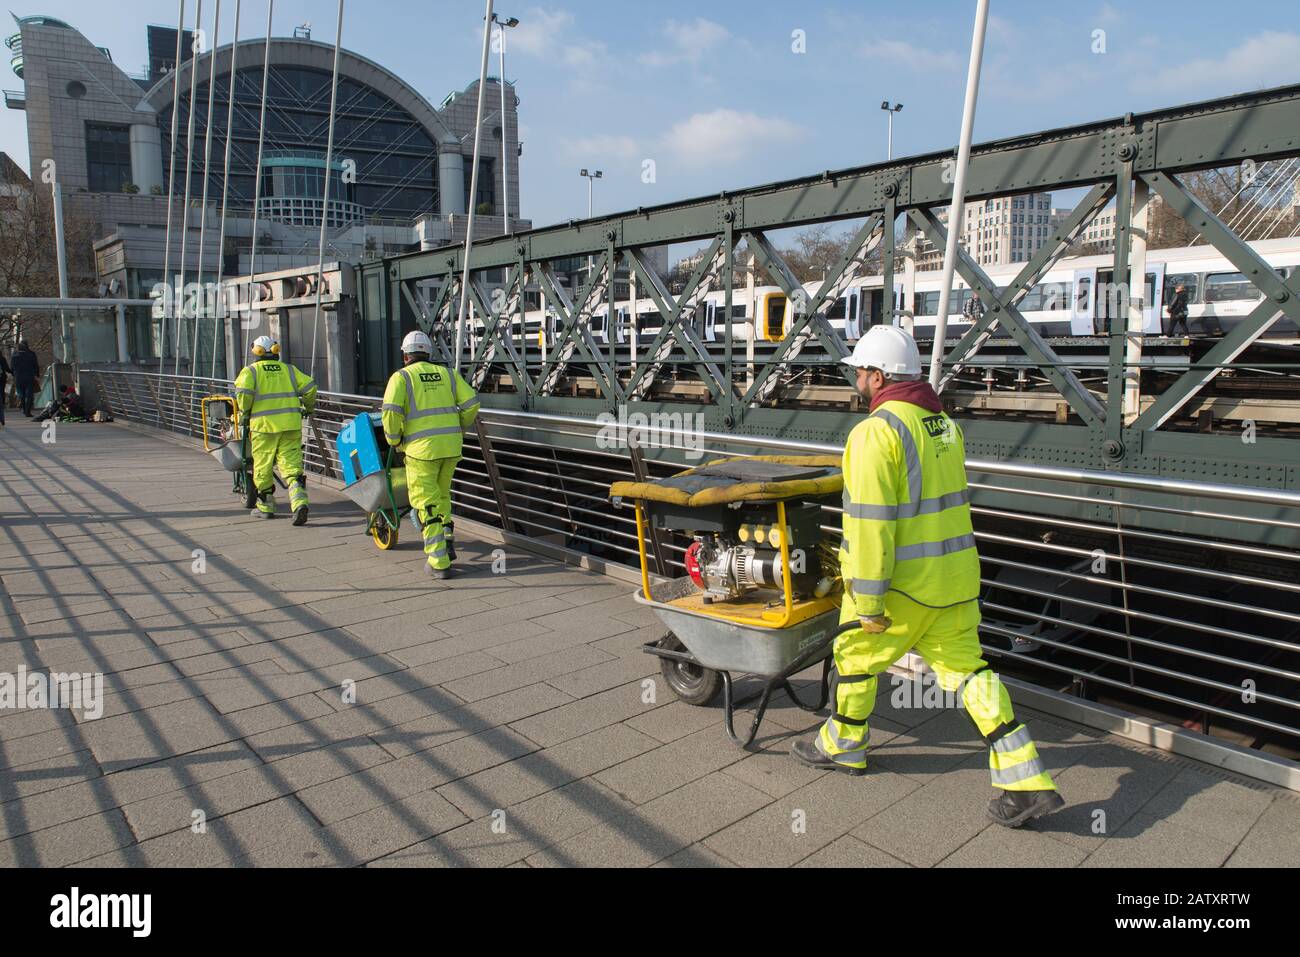 Three building workers carrying heavy equipment in wheelbarrows, Charing Cross, Central London, UK. 3 ouvriers du bâtiment, Londres. Stock Photo